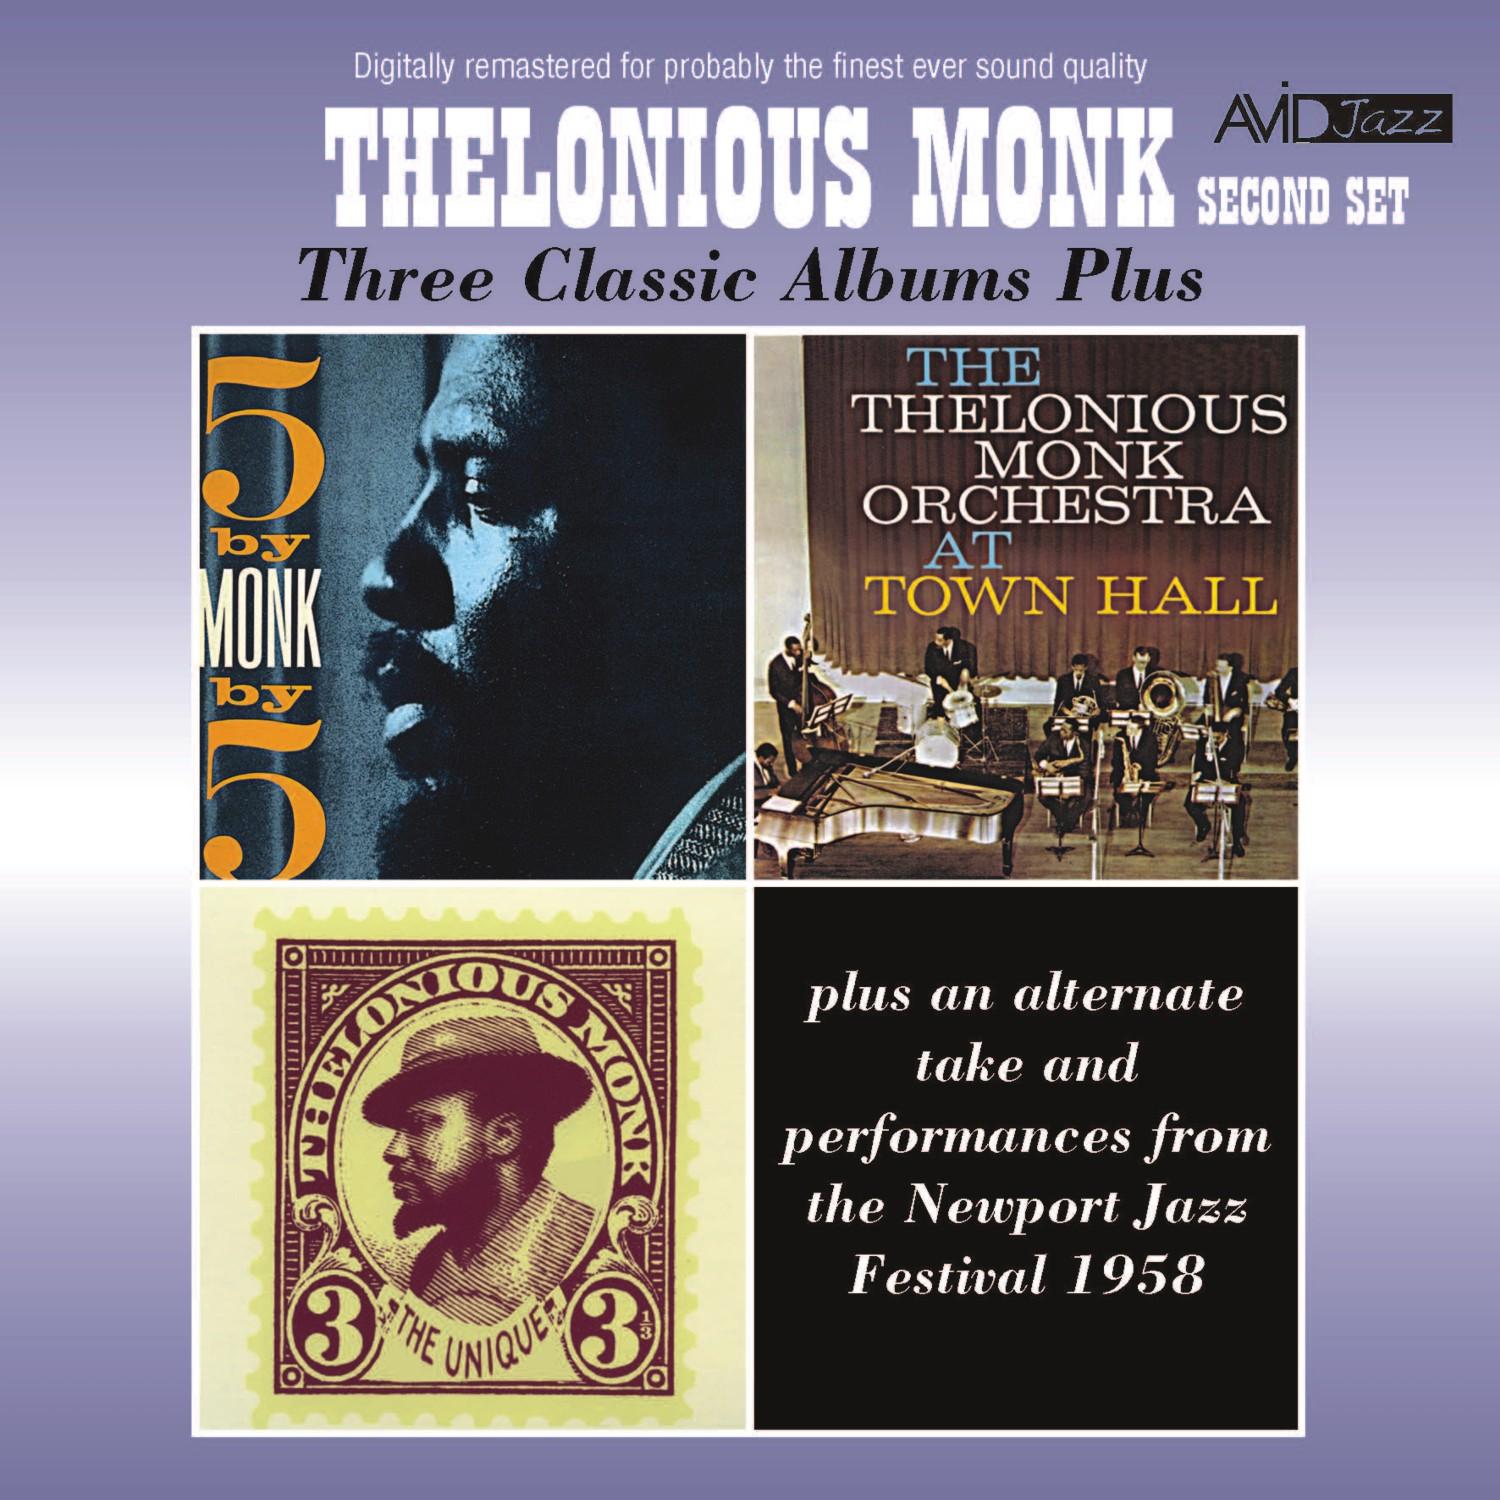 Three Classic Albums Plus (The Unique Thelonious Monk / At Town Hall / 5 by Monk by 5) [Remastered]